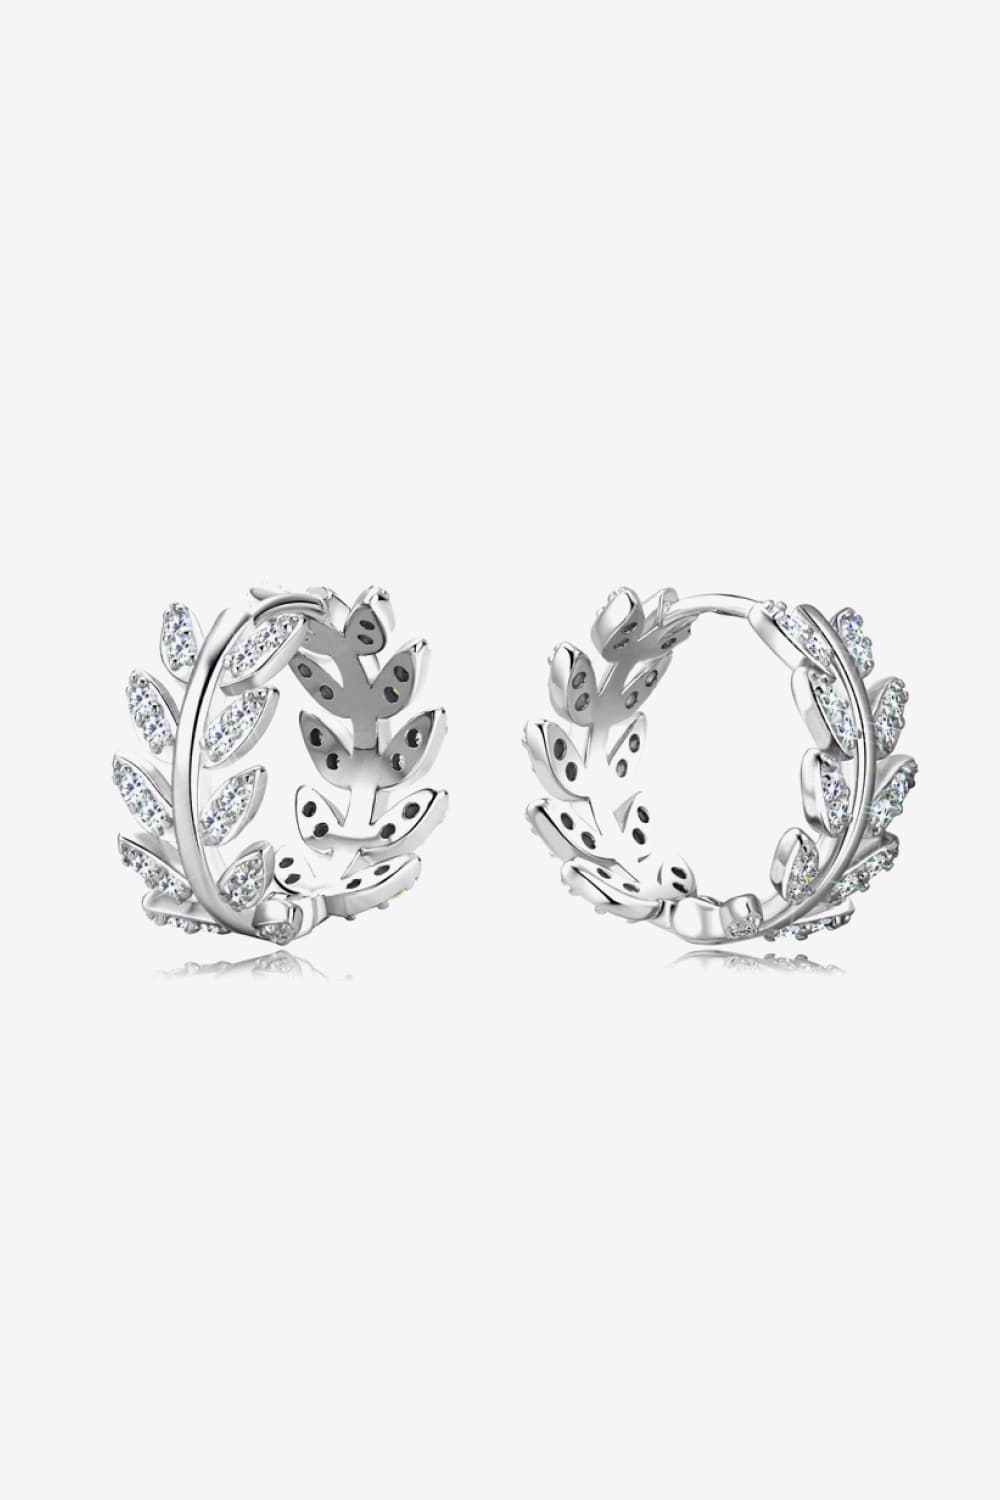 Moissanite Leaf 925 Sterling Silver Earrings free shipping -Oh Em Gee Boutique